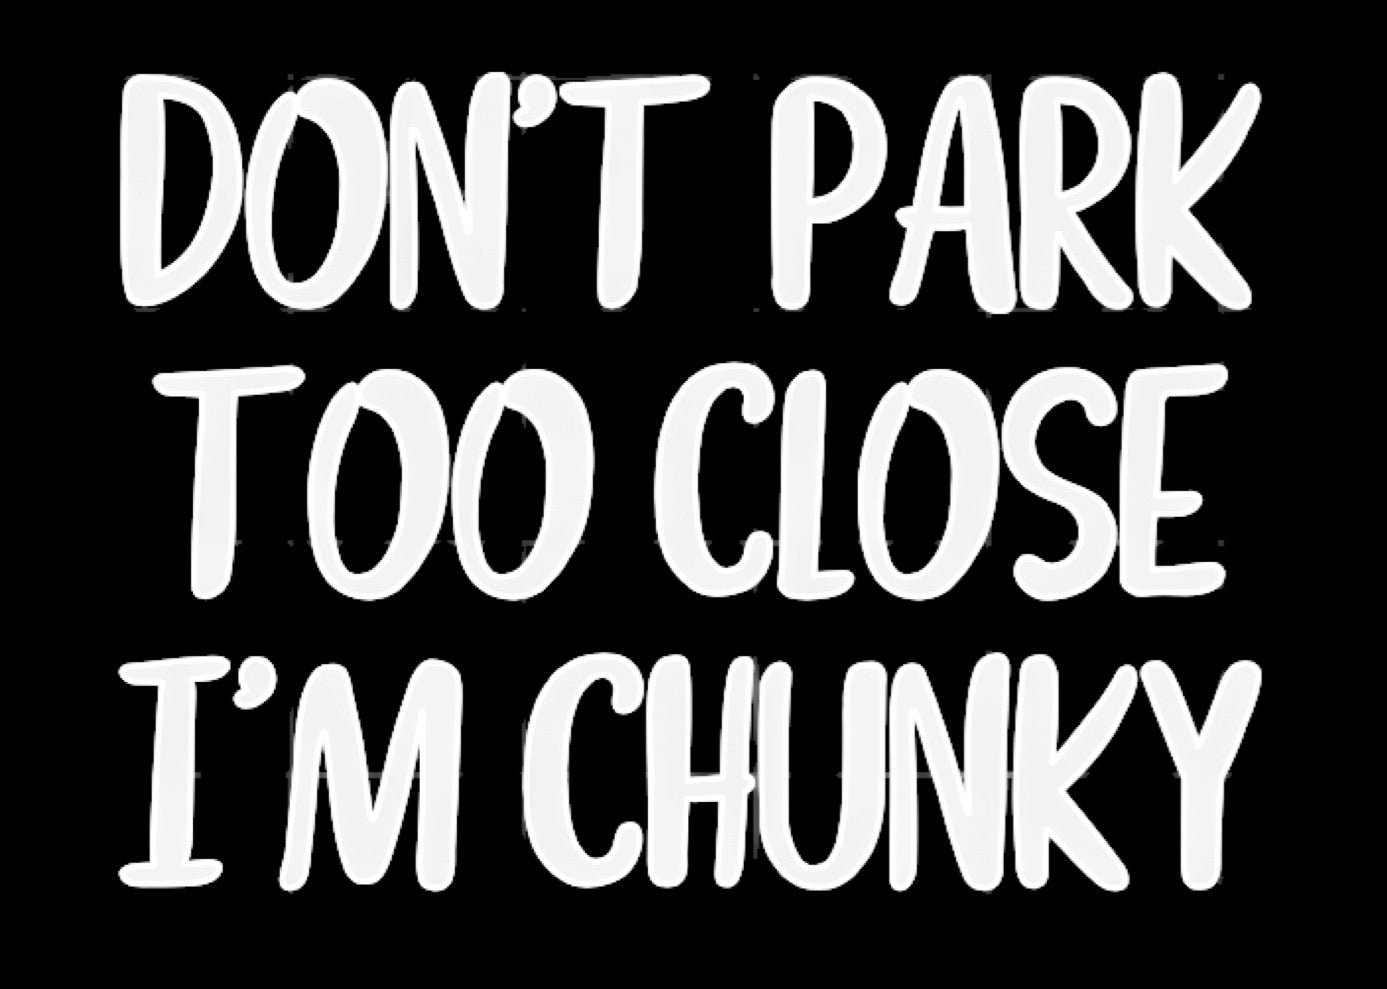 Don’t Park too Close I’m Chunky window decal